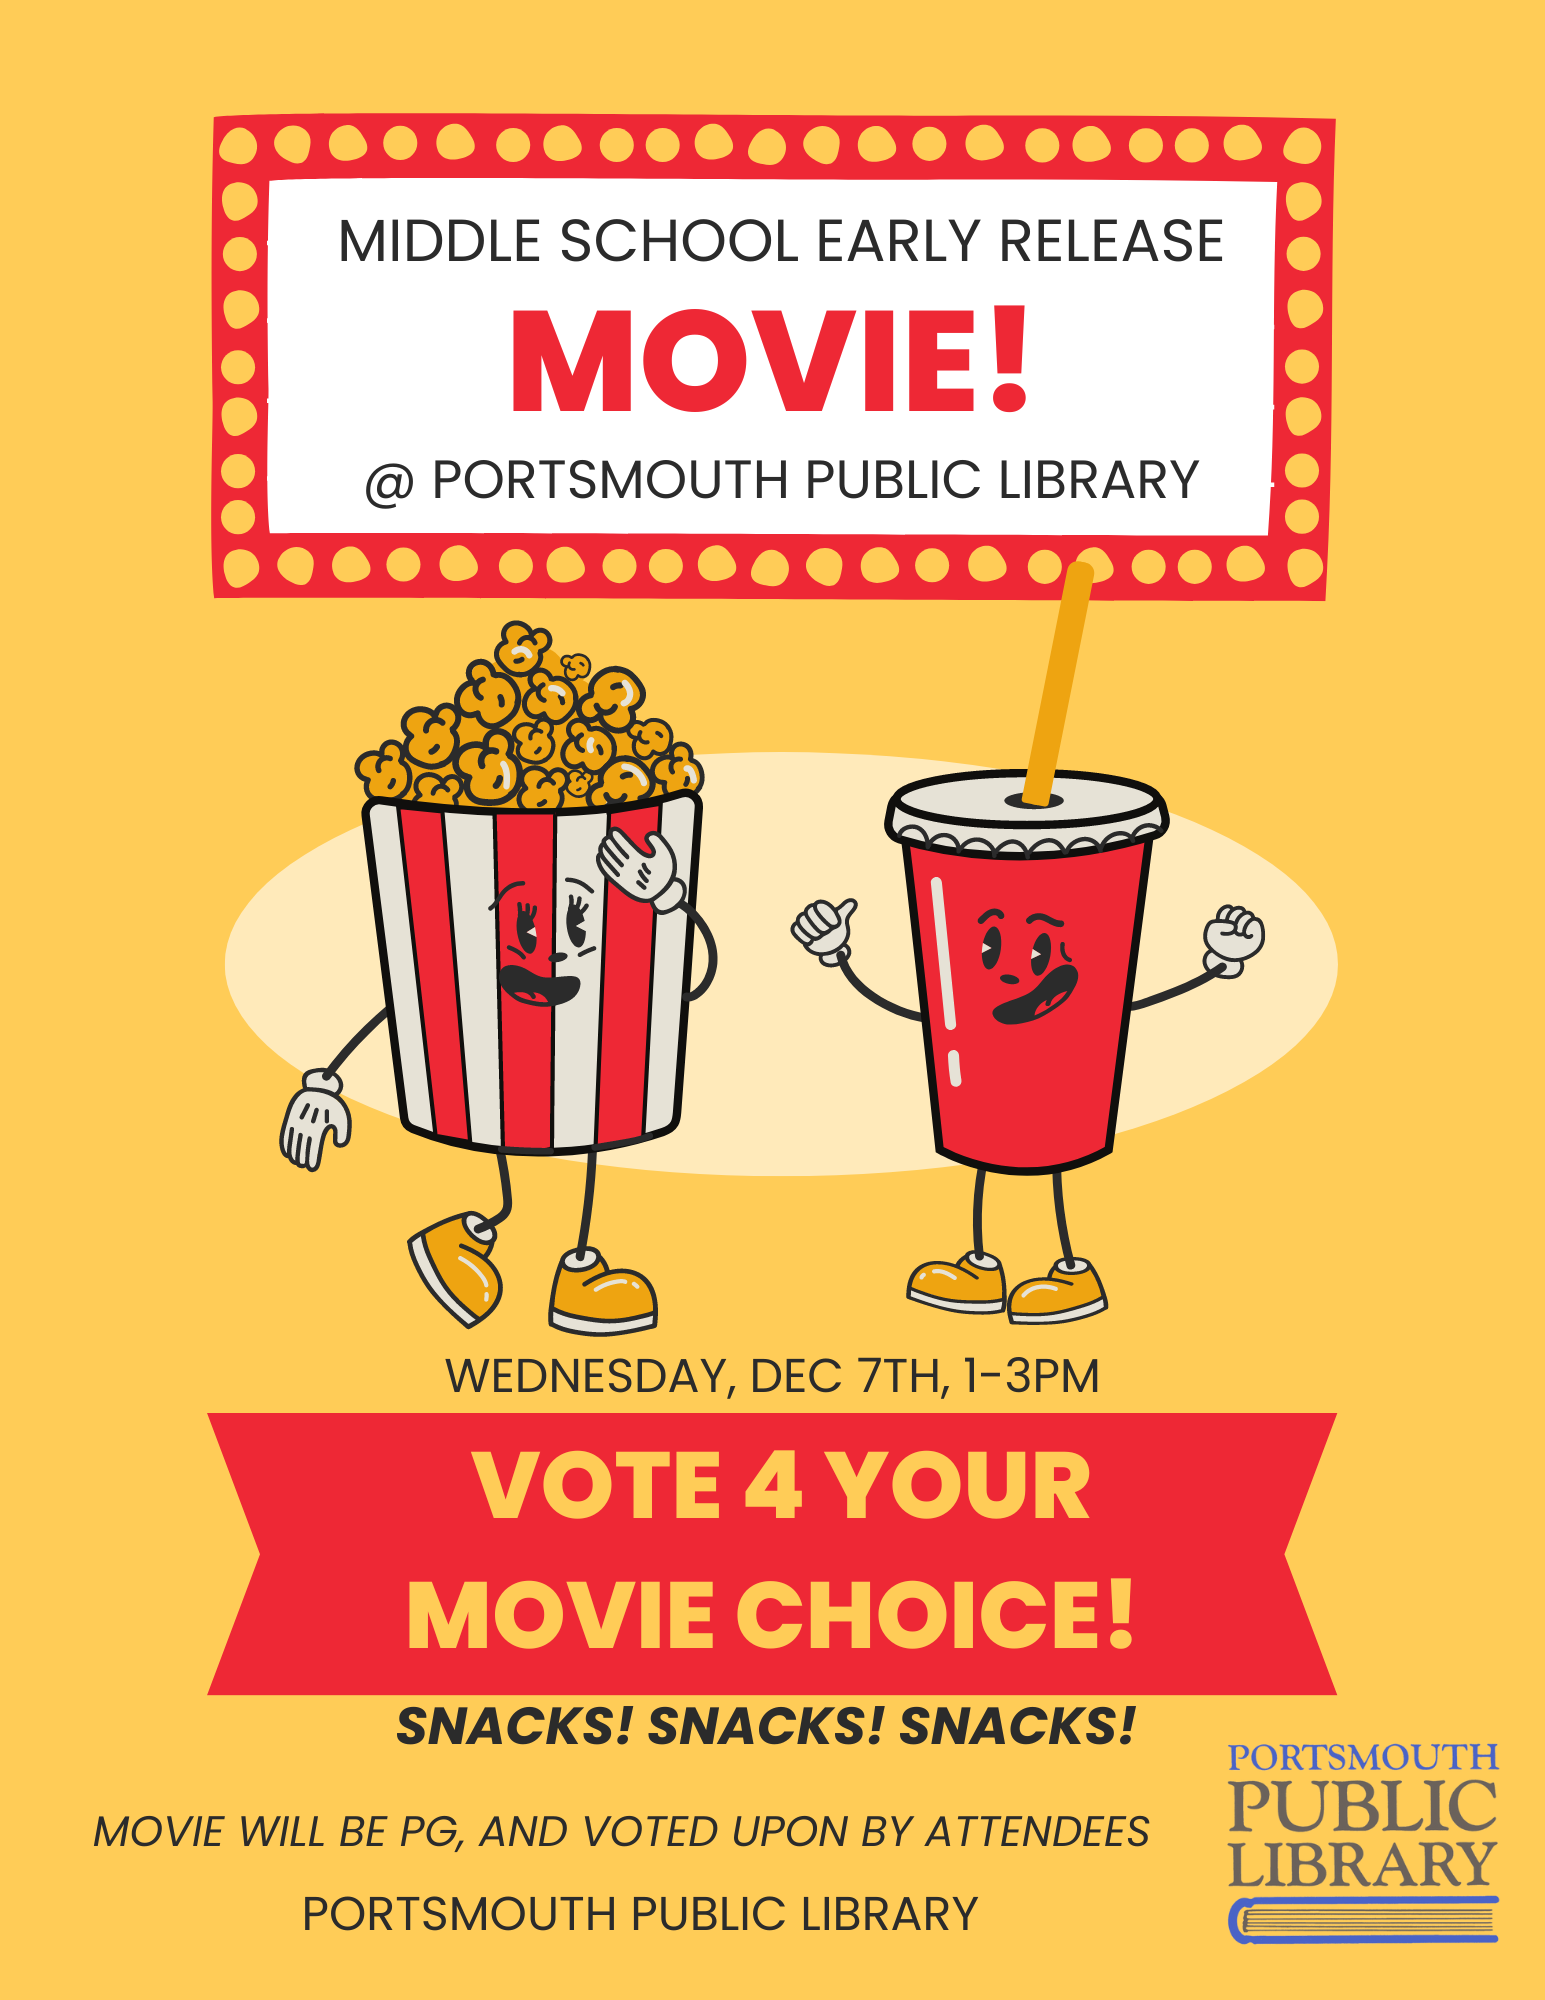 Text reads Middle School Early Release Movie @ Portsmouth Public Library. Wednesday, December 7th, 1-3pm. Vote for your movie choice. Snacks! Snacks! Snacks! Movie will be PG and will be voted upon by attendees. Portsmouth Public Library. there is an image of a cartoon popcorn tub and soda in the center, and a logo for Portsmouth Public Library in the lower right corner